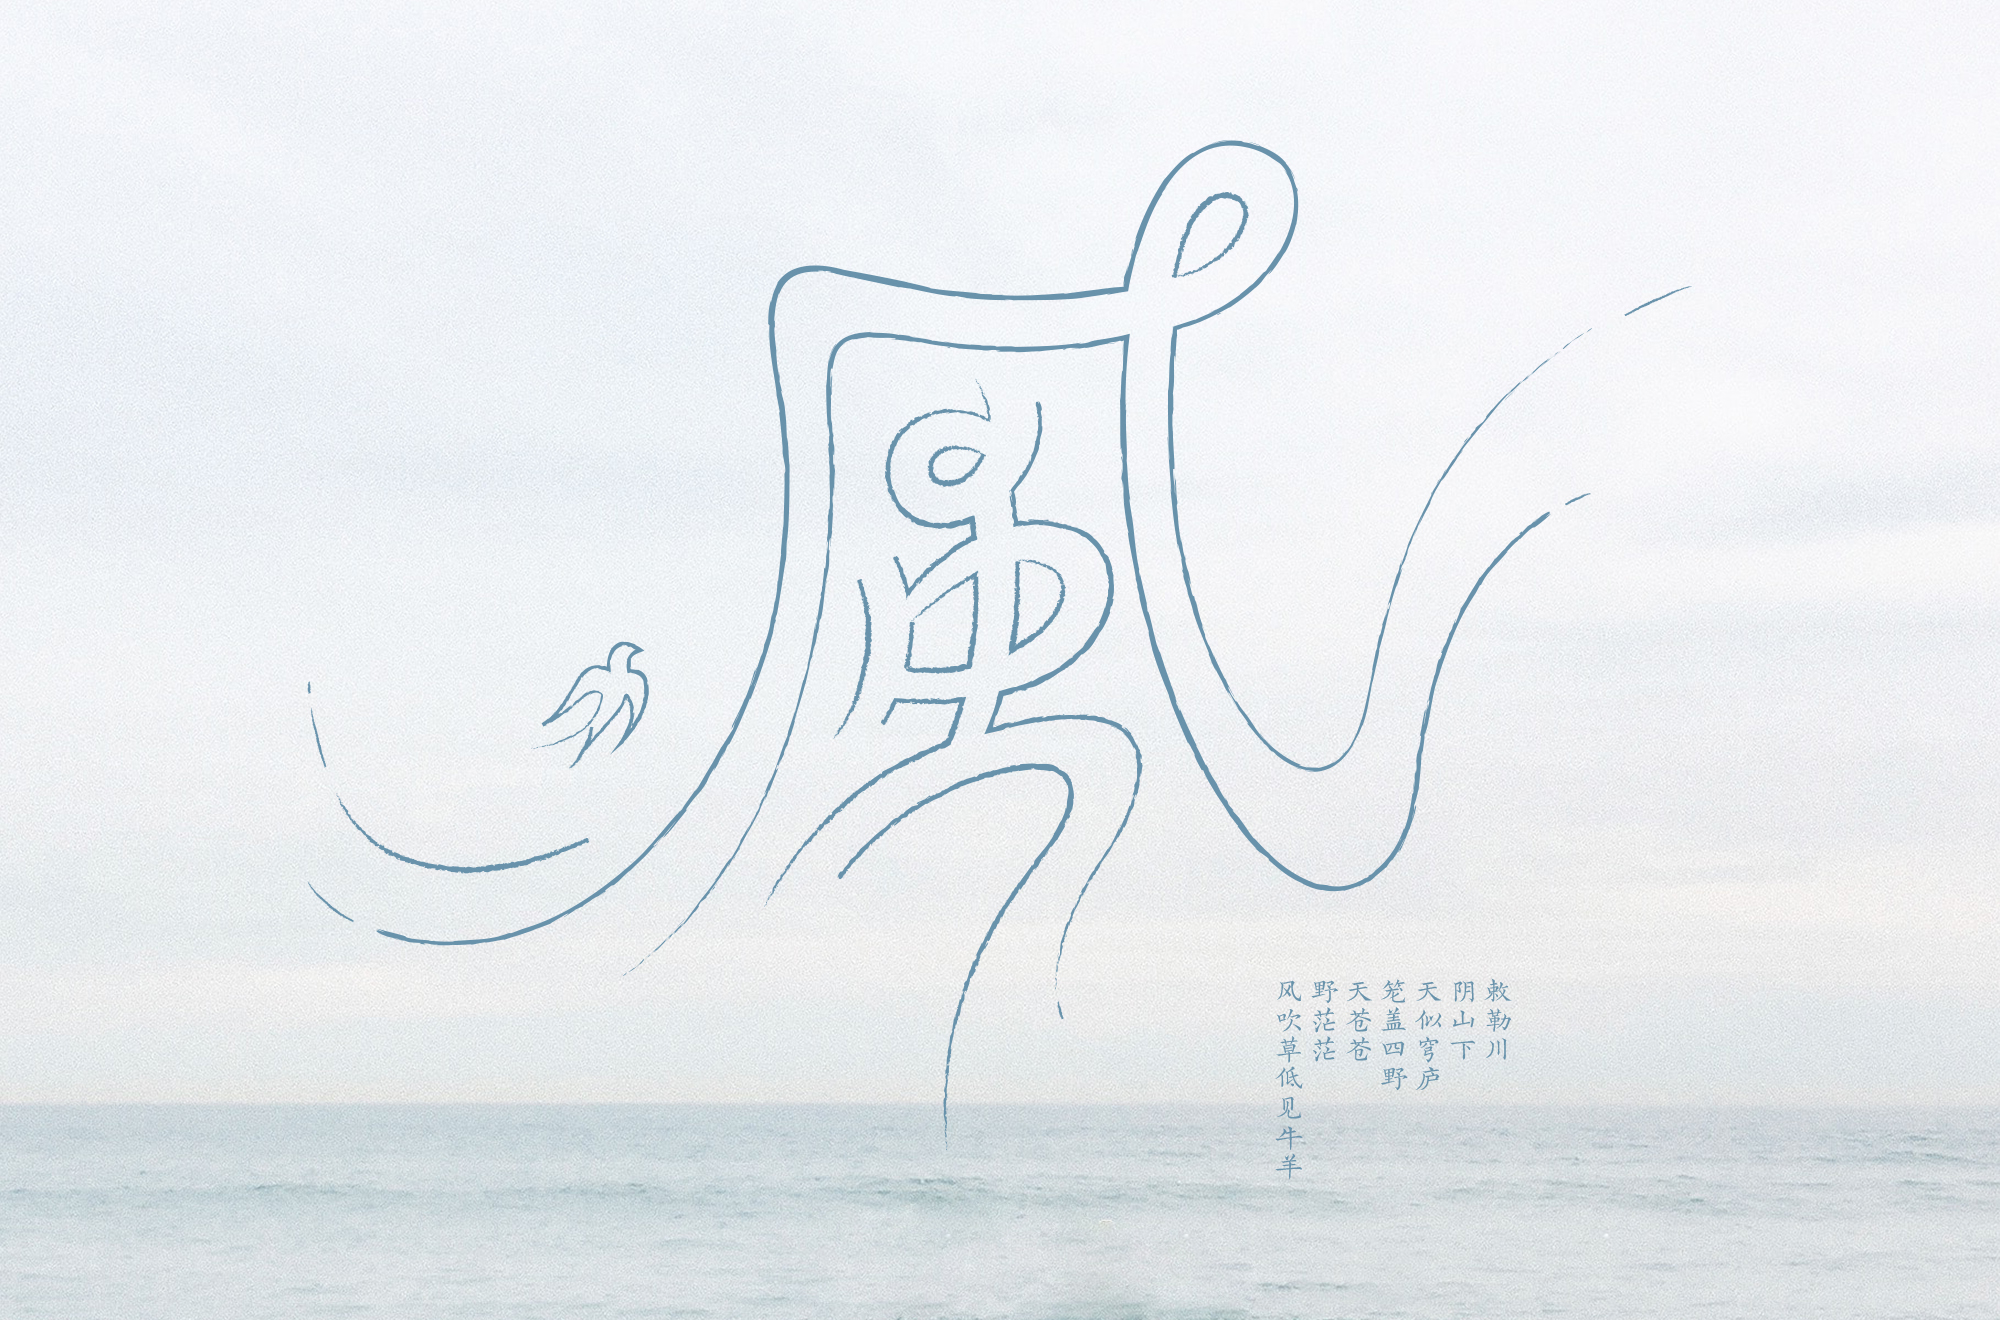 Creative font design with different styles and backgrounds with the theme of wind